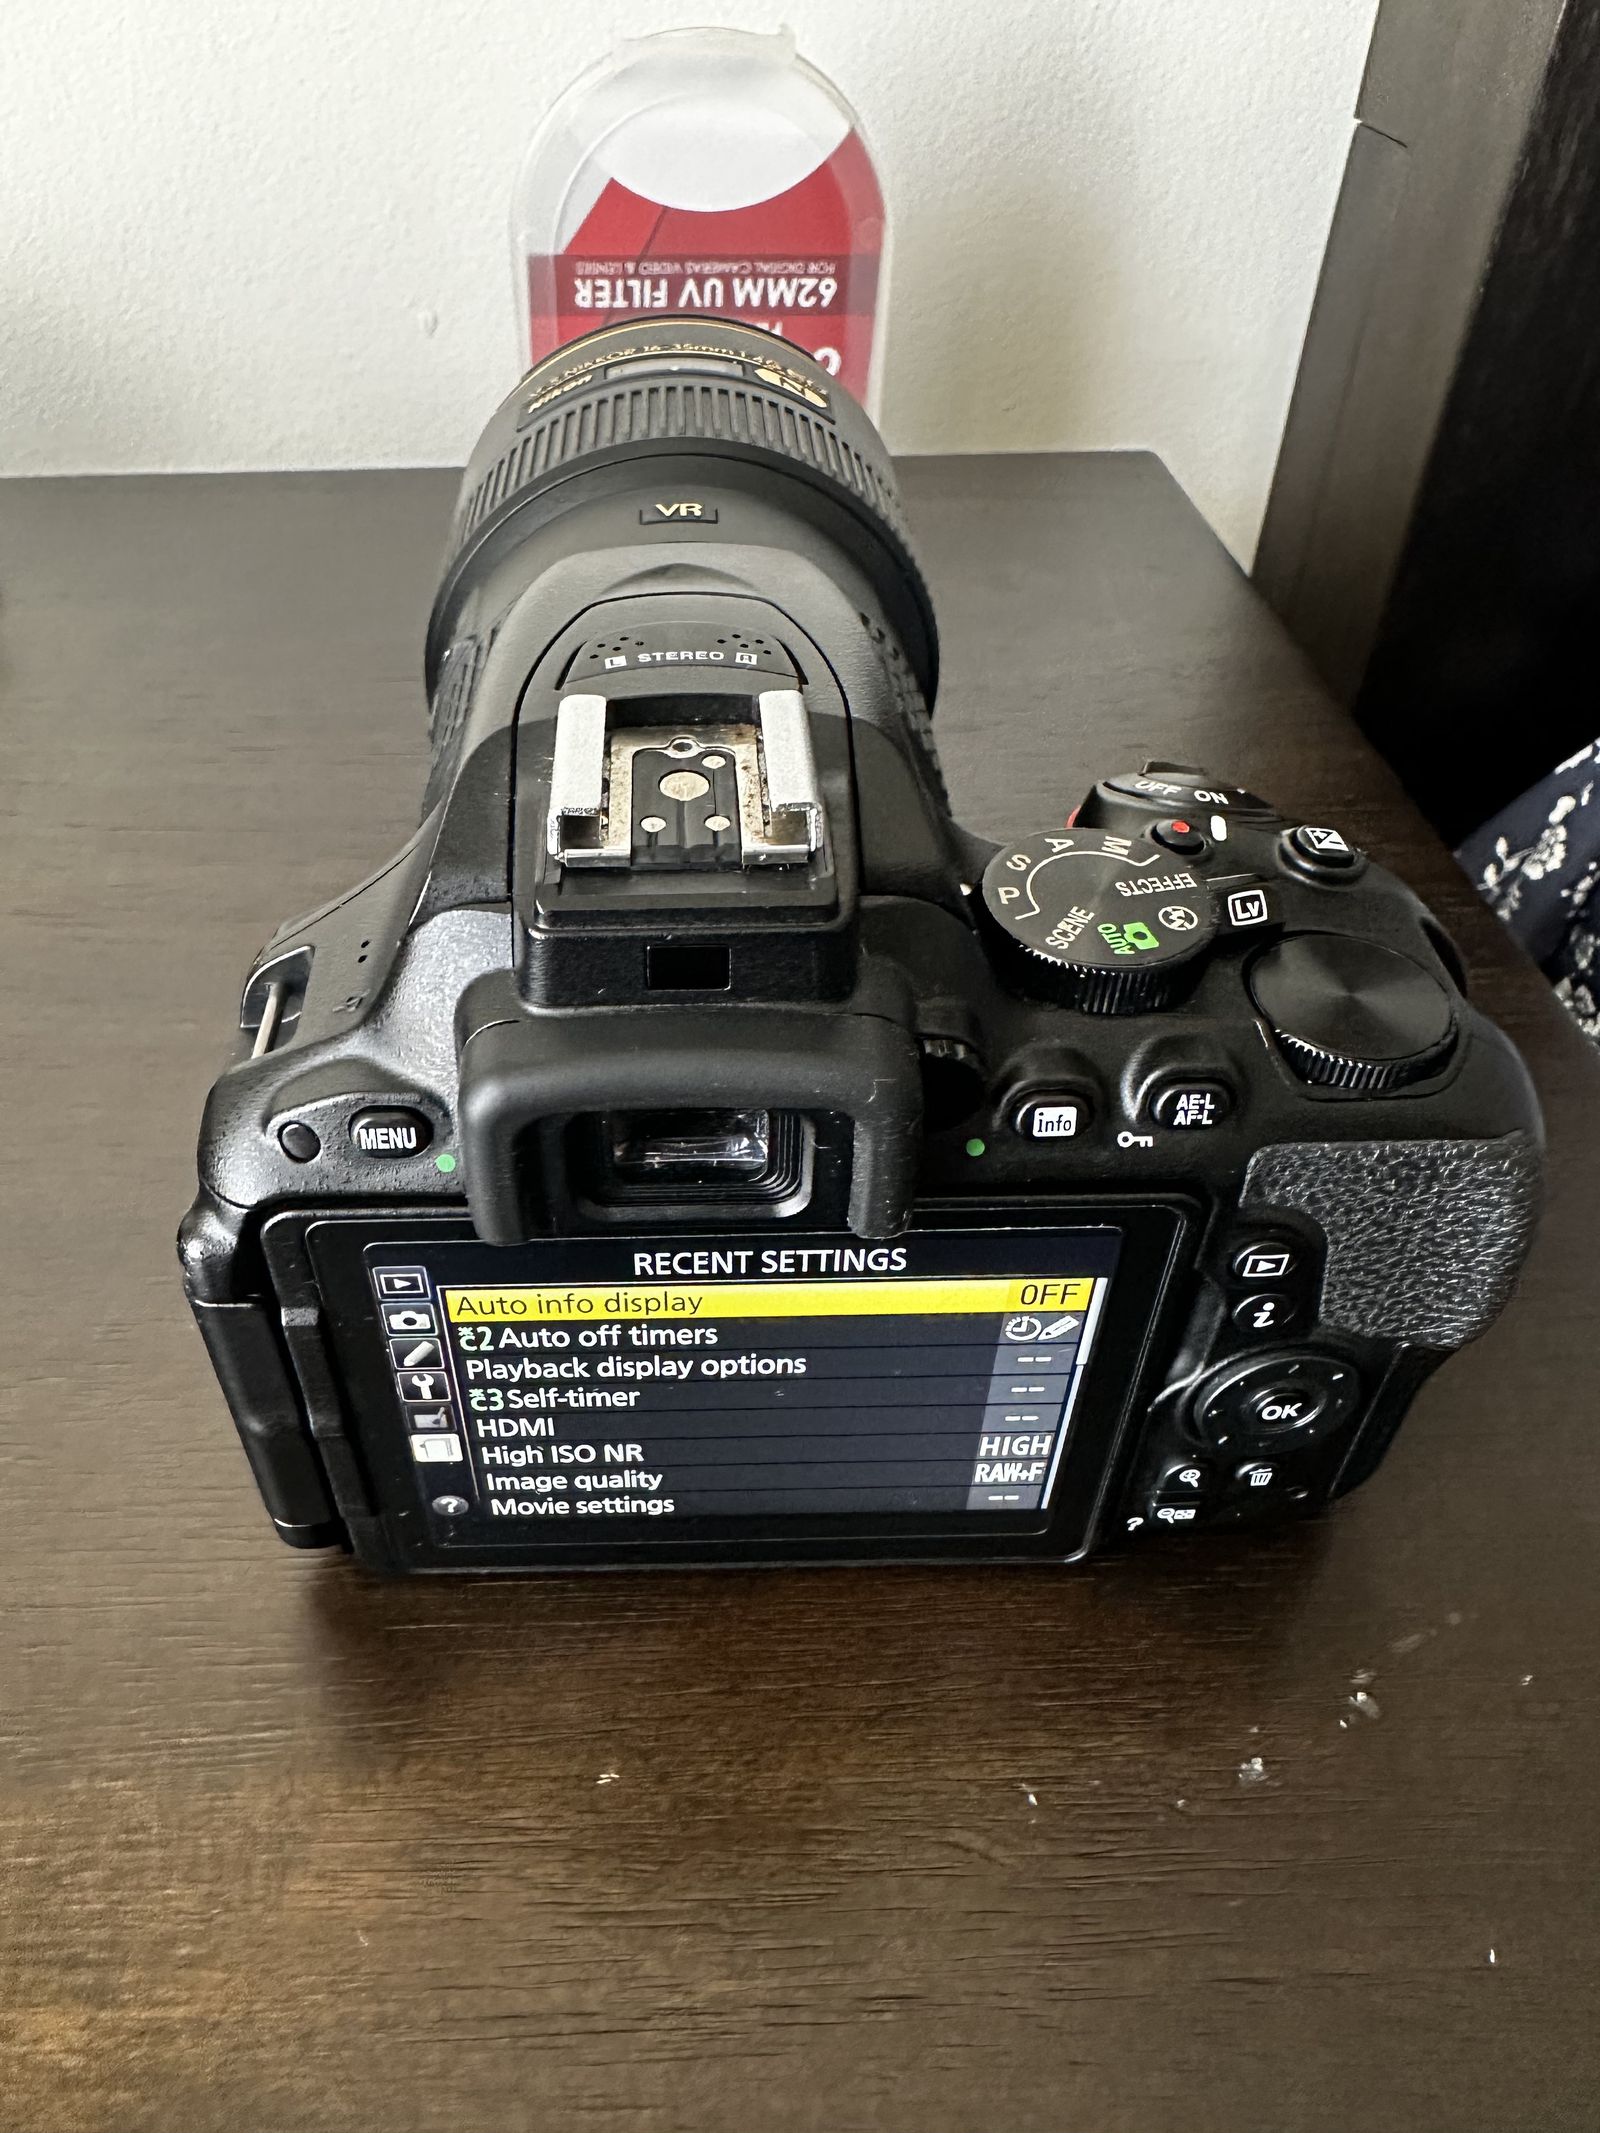 Nikon D5500 with lens and accessories From Nickali Gear Shop On 